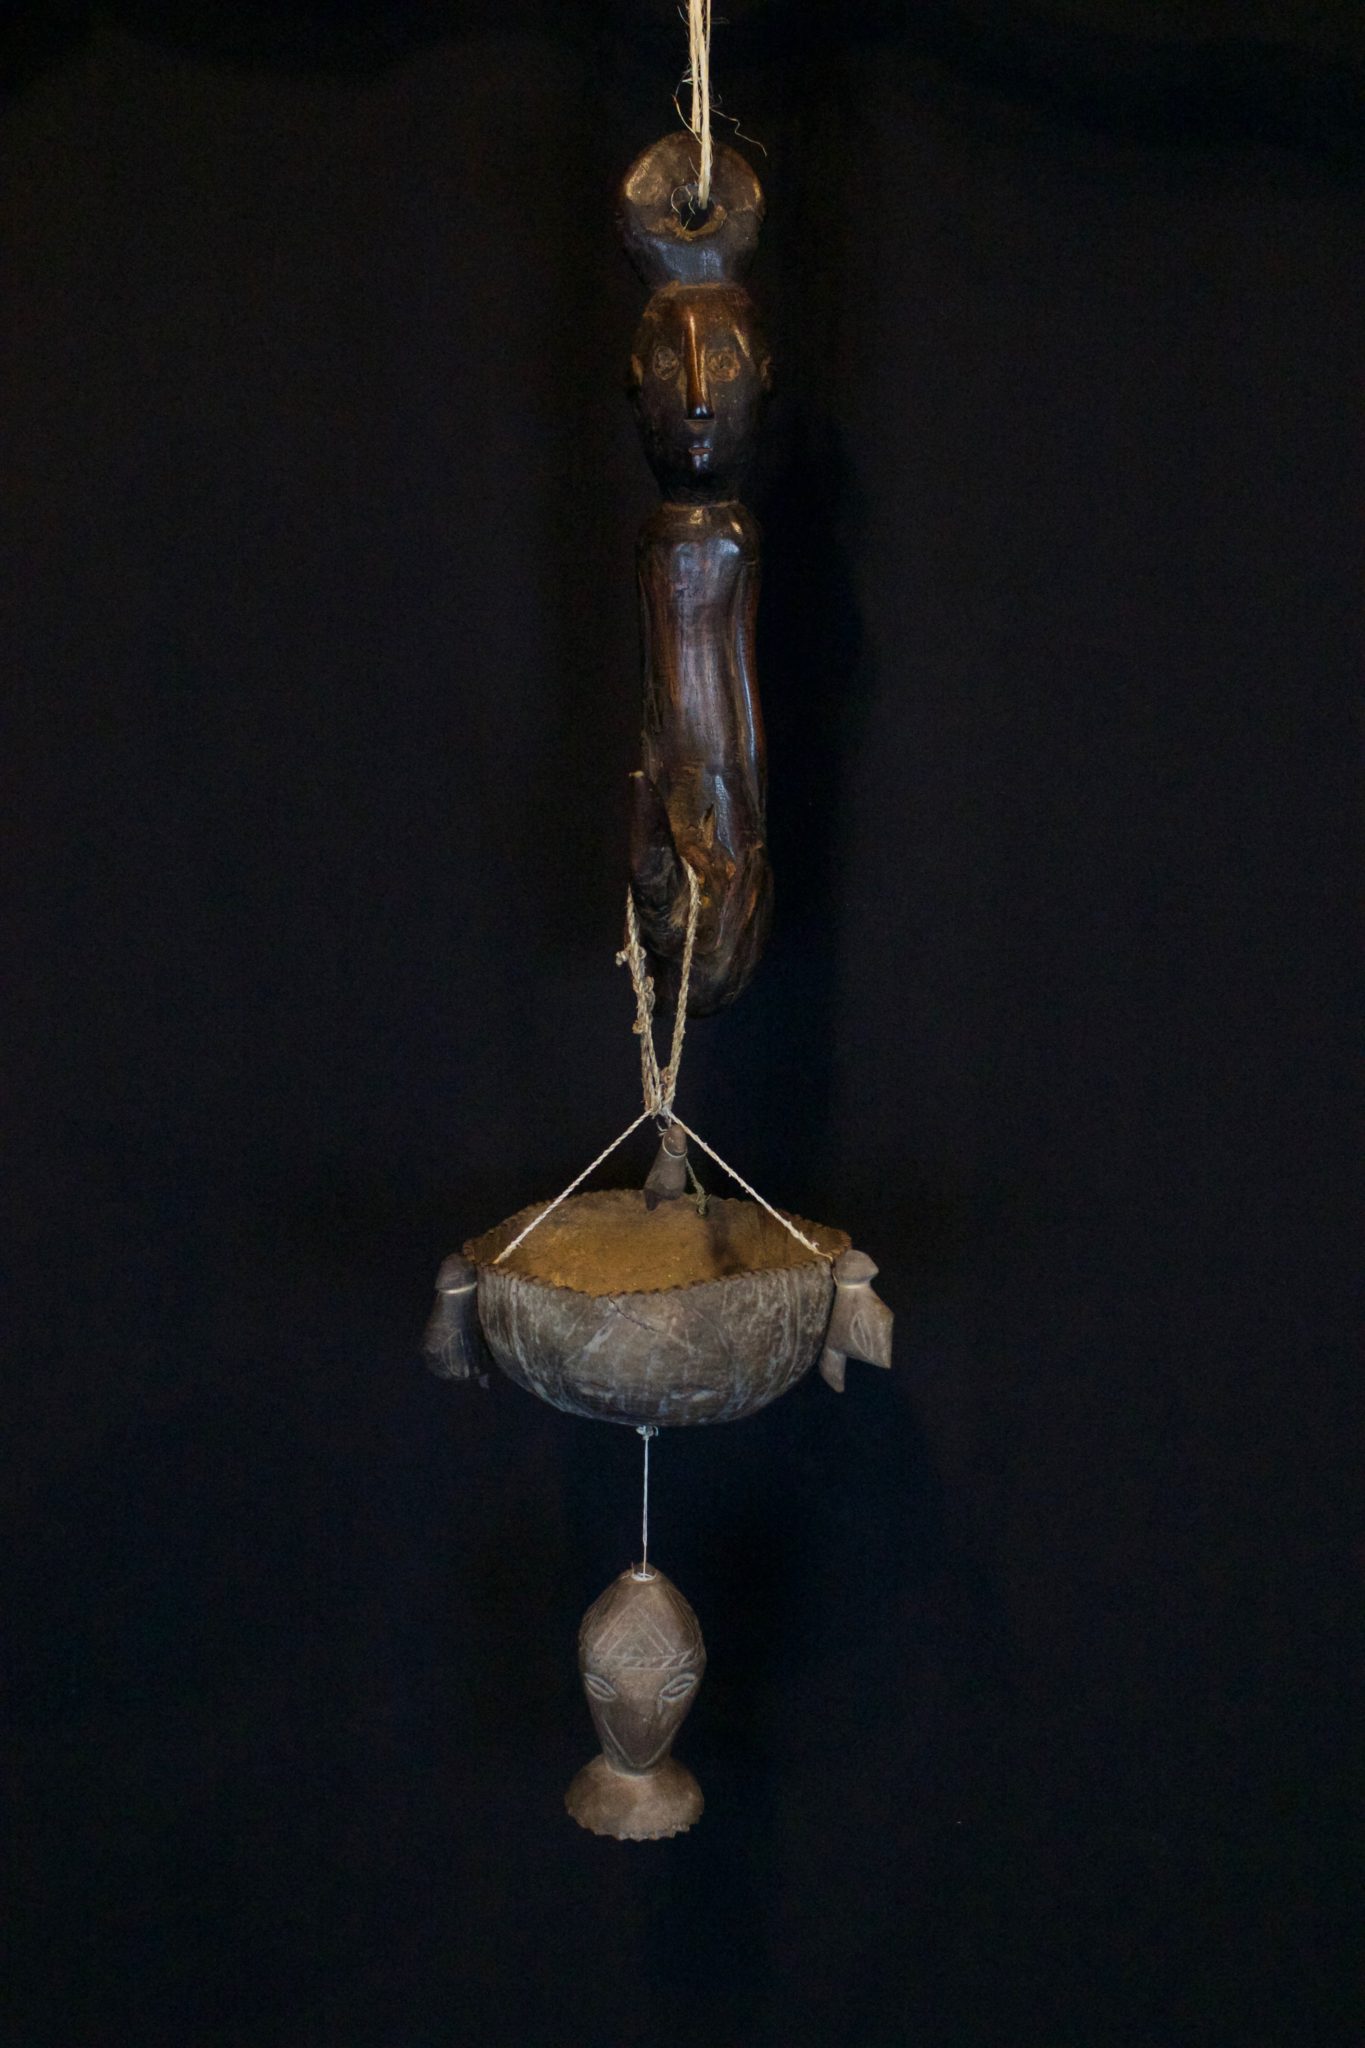 Hanging Effigy and Herb Bowl - set, East Sumba Island, Indonesia, Soru village, Early 20th c, Wood, coconut, fiber string. The effigy hanger gives great healing power to the herbs placed in the coconut bowl suspended below it. The bowl has three bird figure and three carved faces with an amulet head hanging below it. 30” x 6” x 6”, $1200.